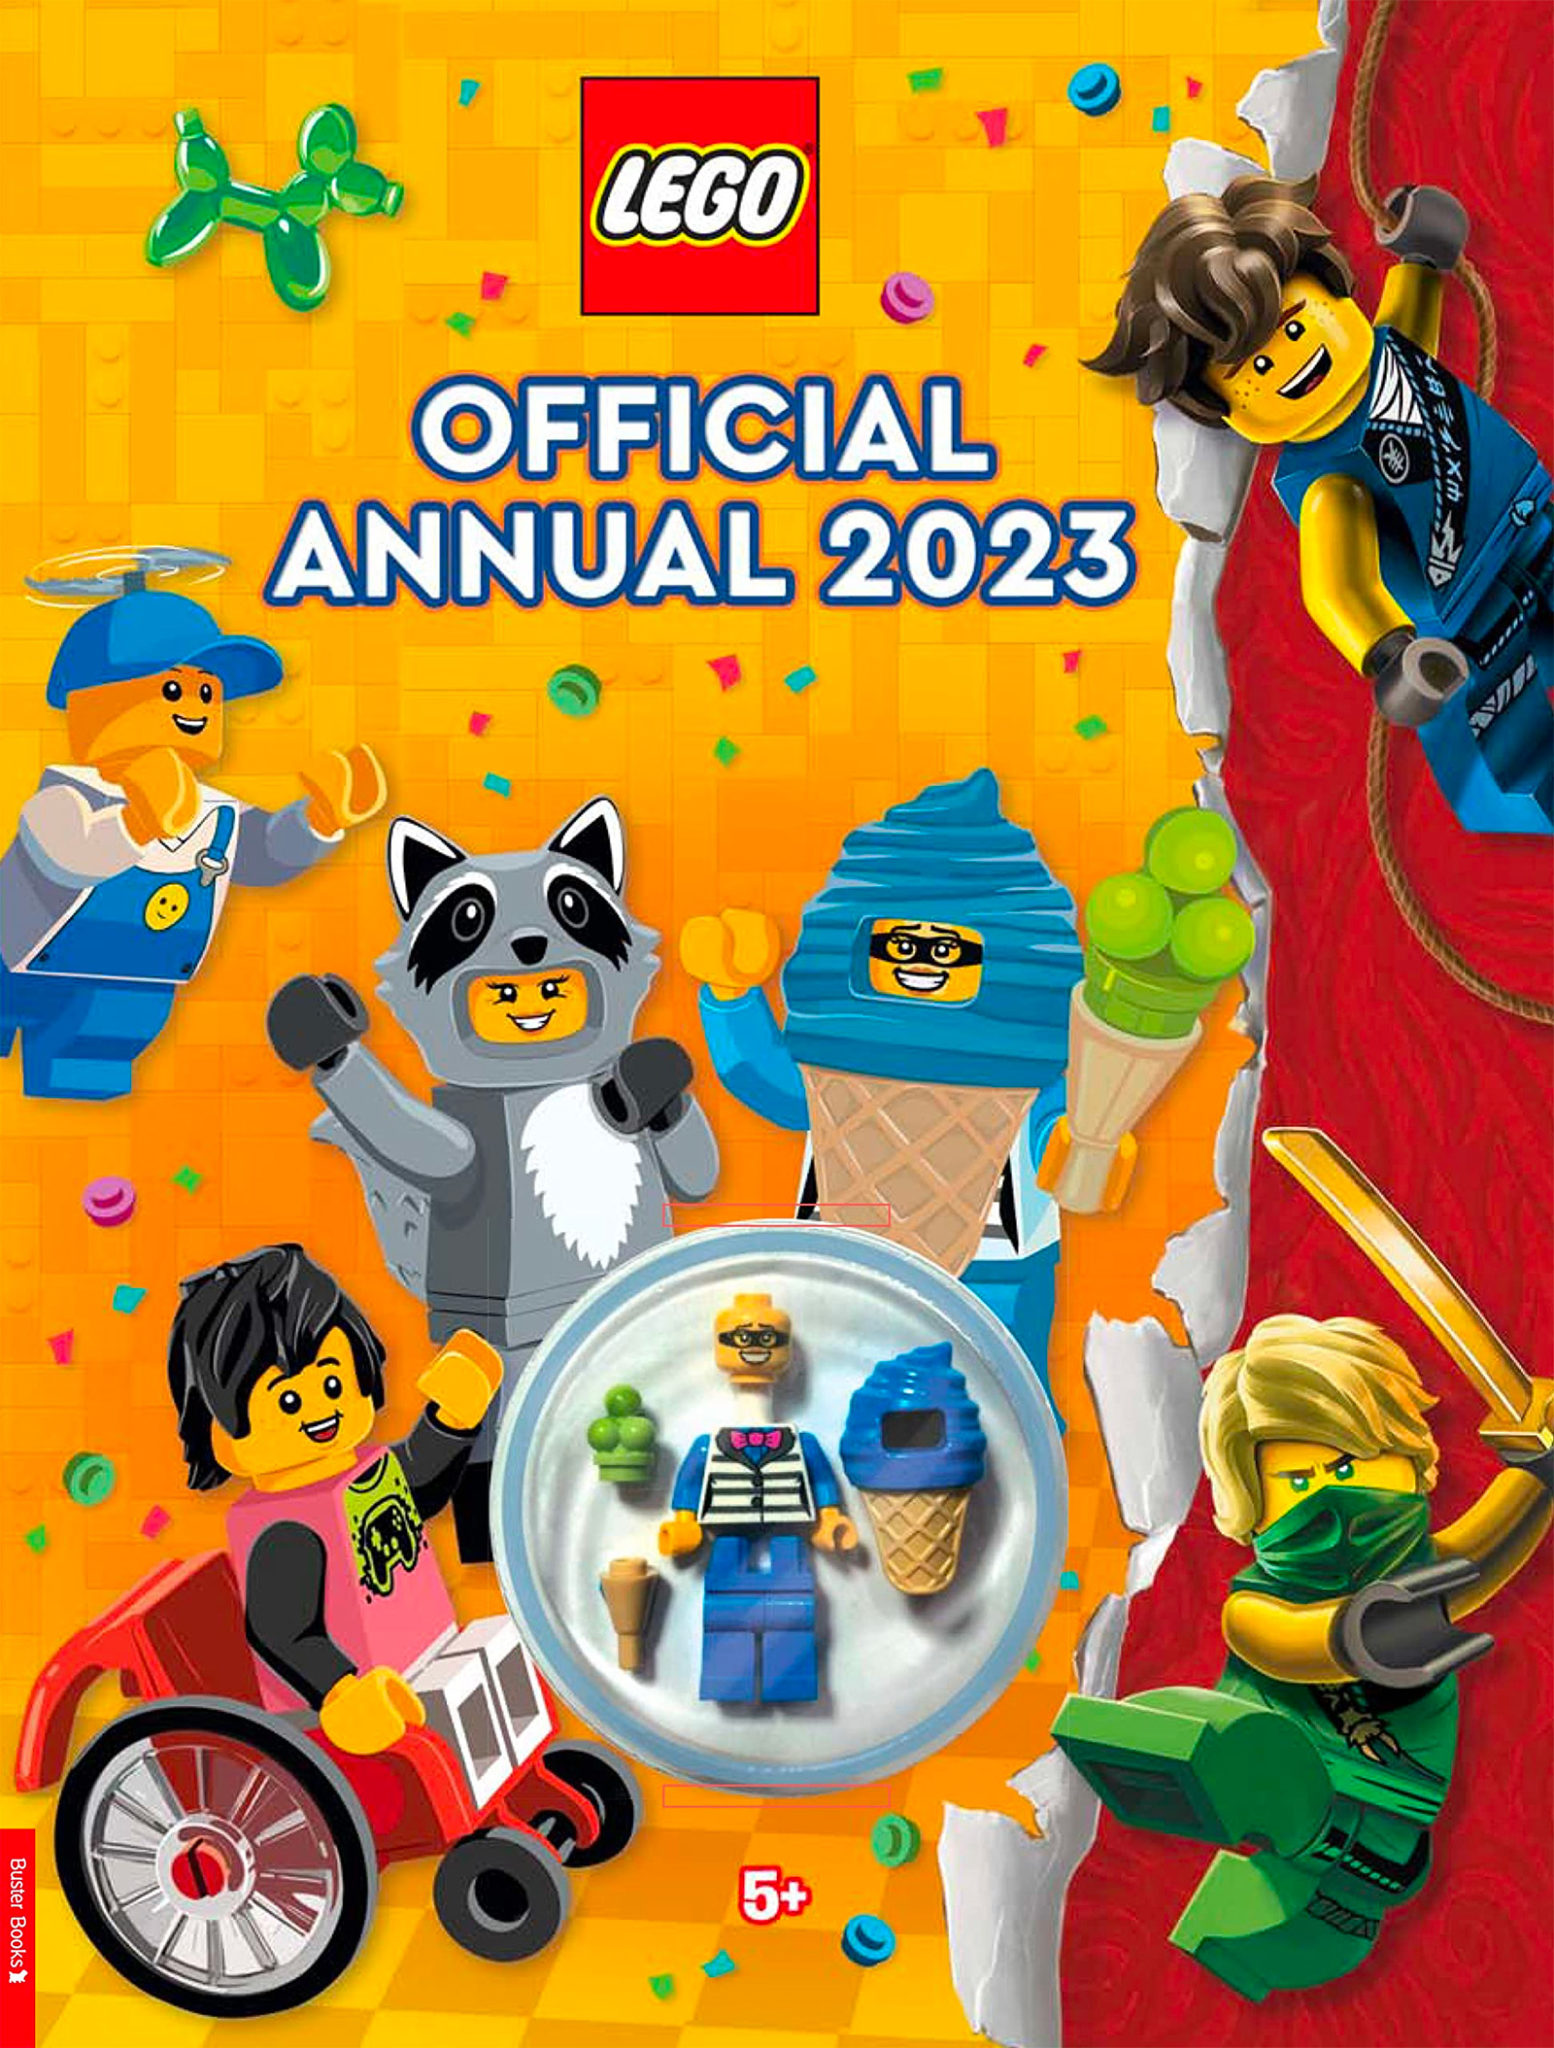 LEGO Official Annual 2023: one more character in costume for your collection